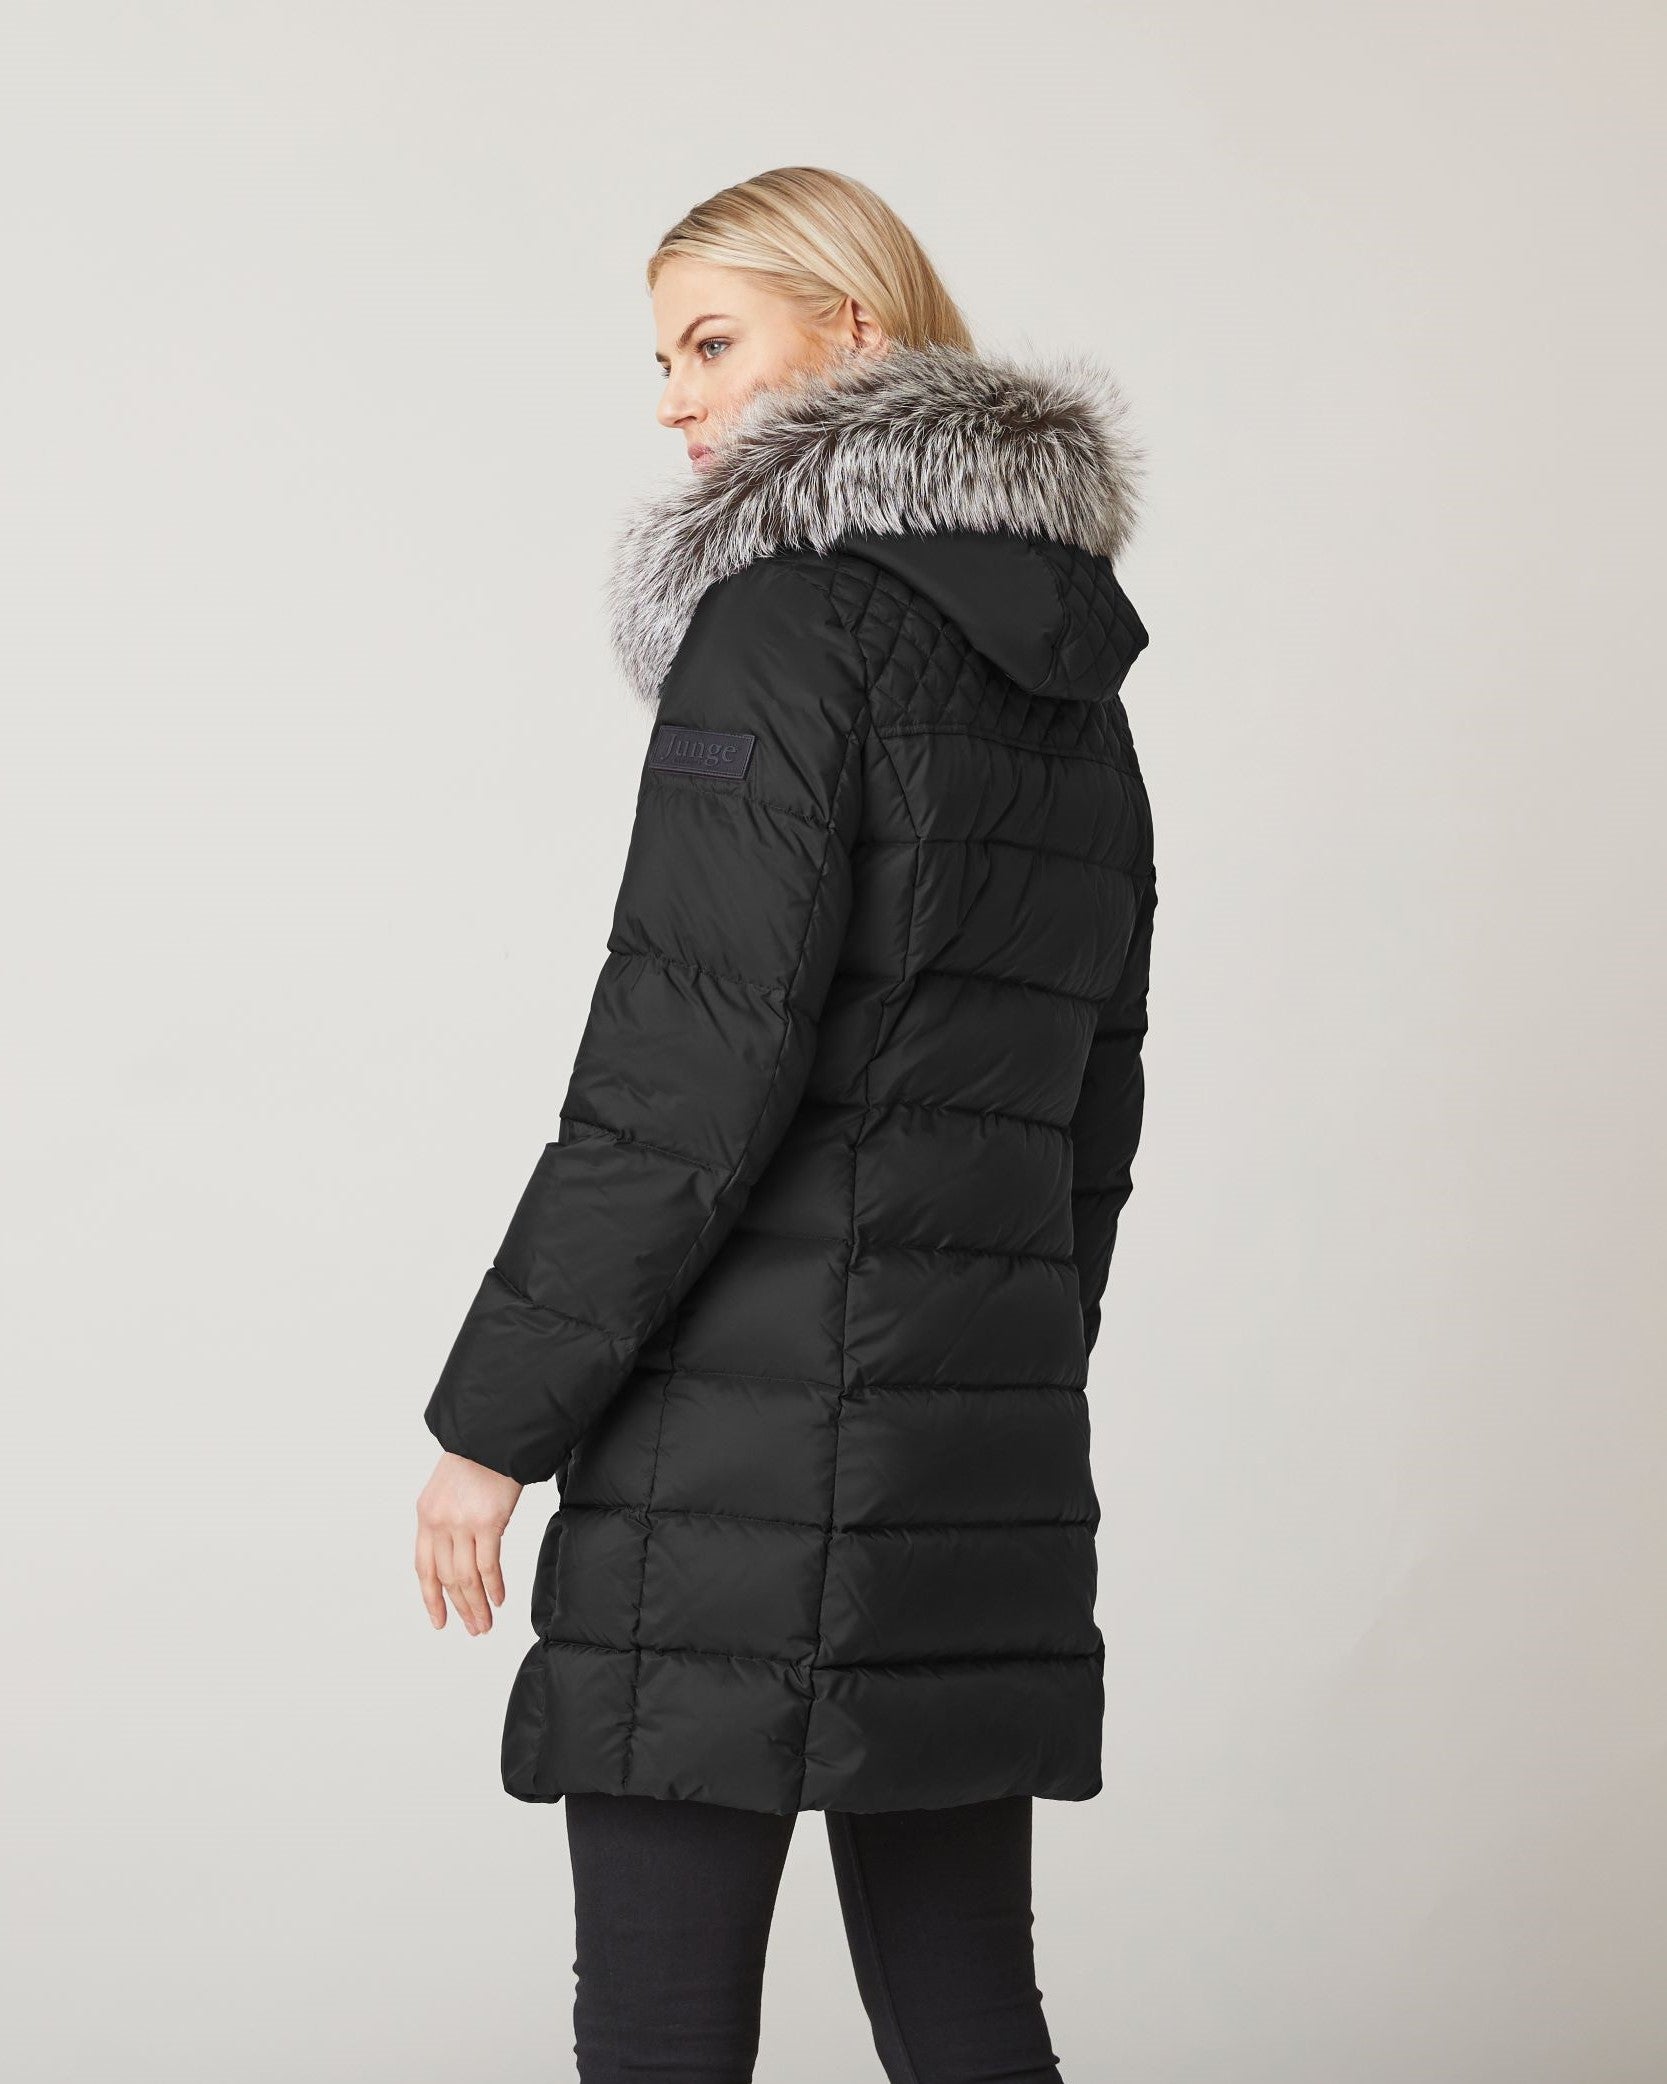 Winter Jackets | For Every Occasion | Timeless Choices